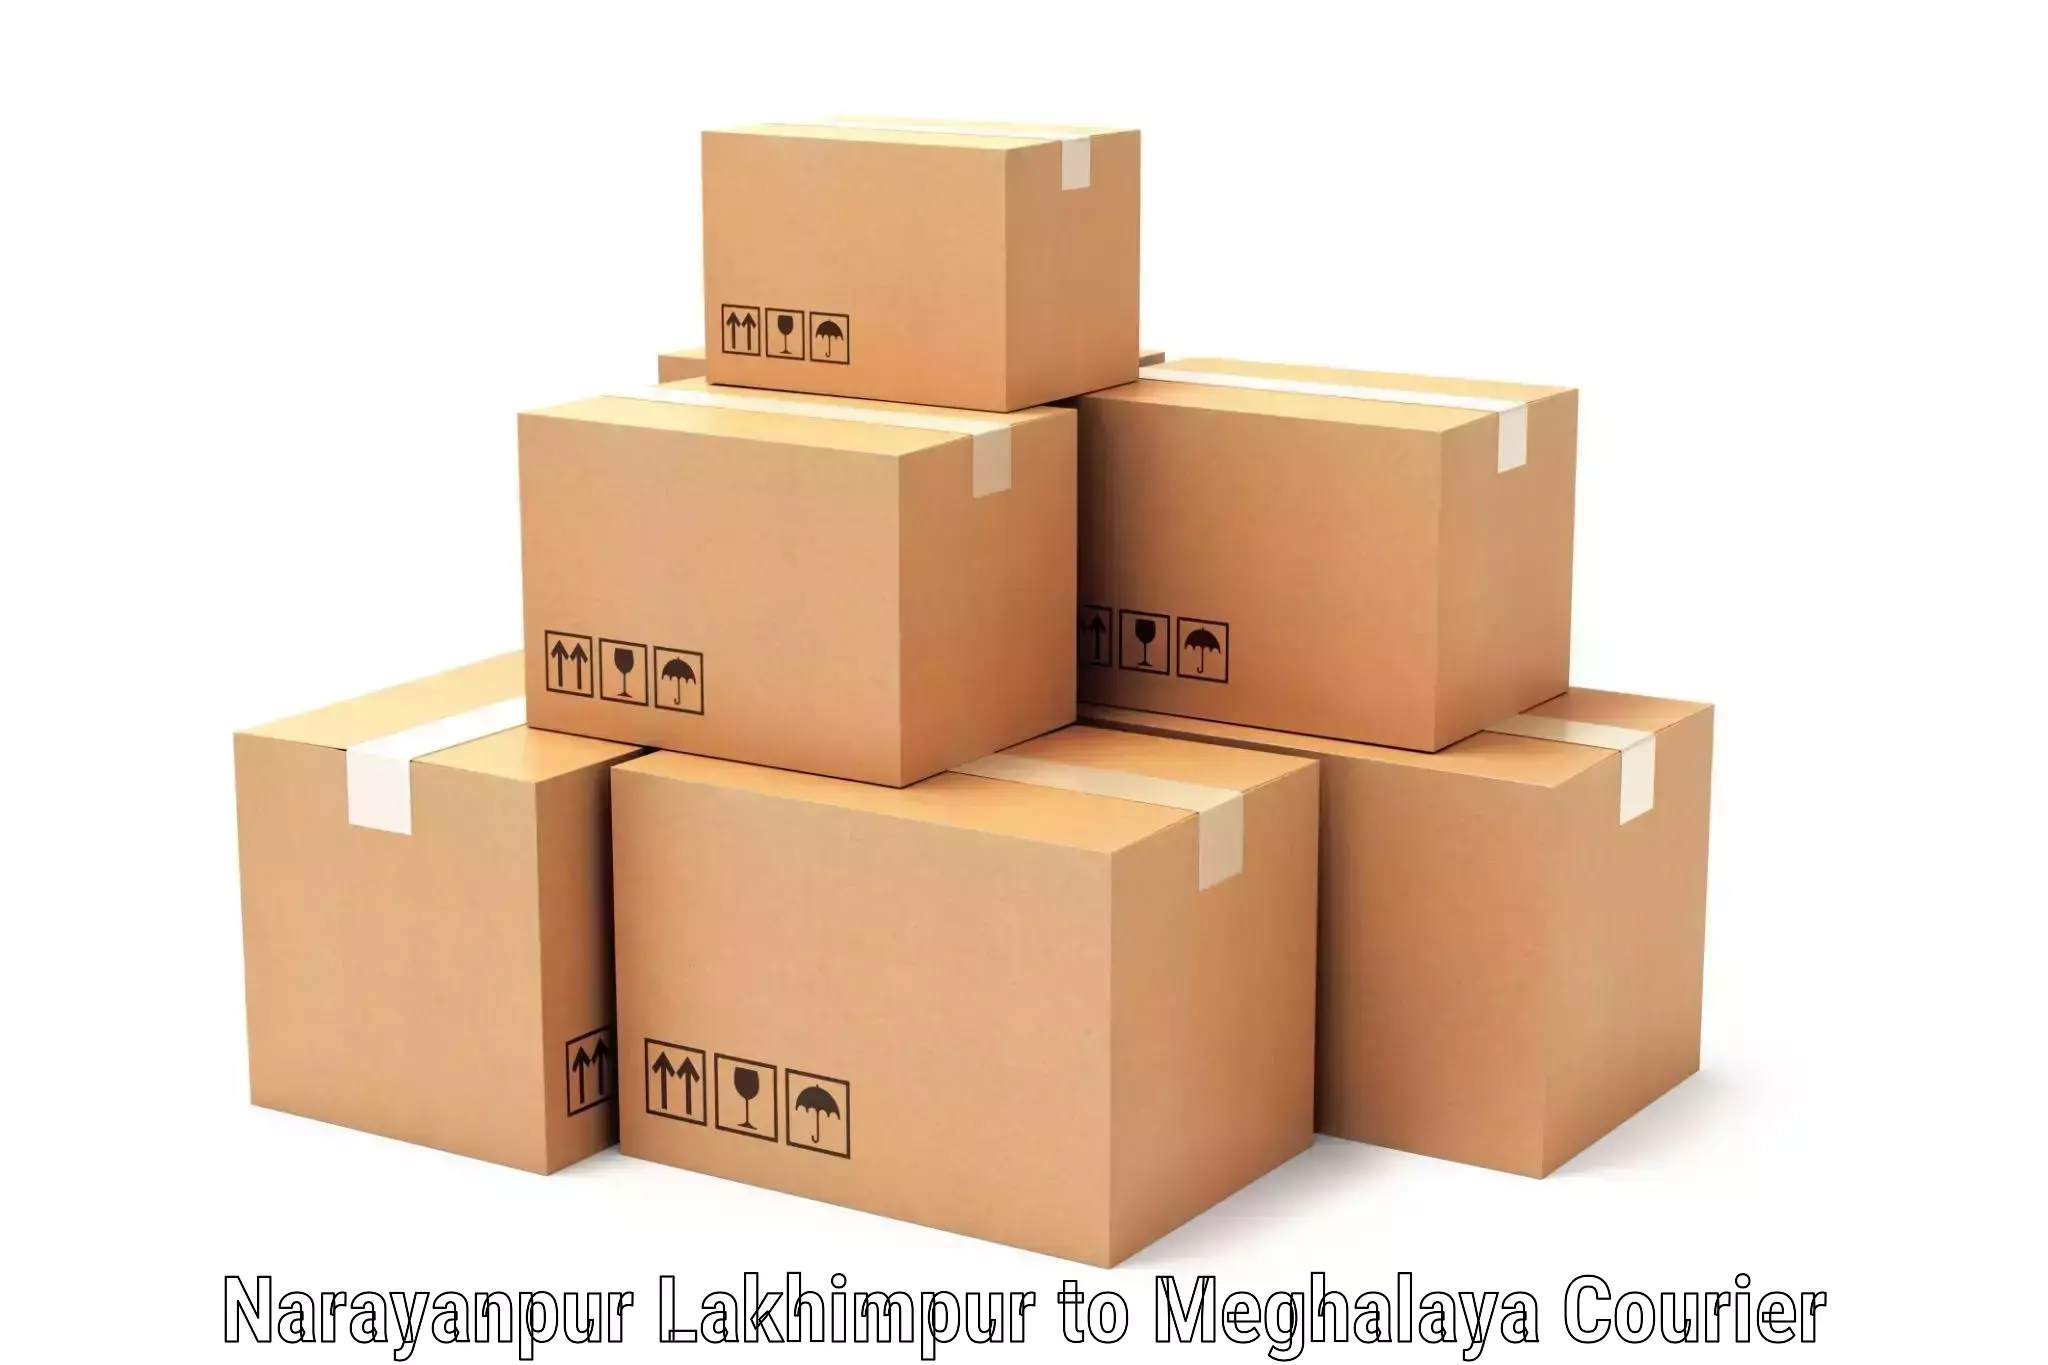 Cost-effective shipping solutions Narayanpur Lakhimpur to Shillong